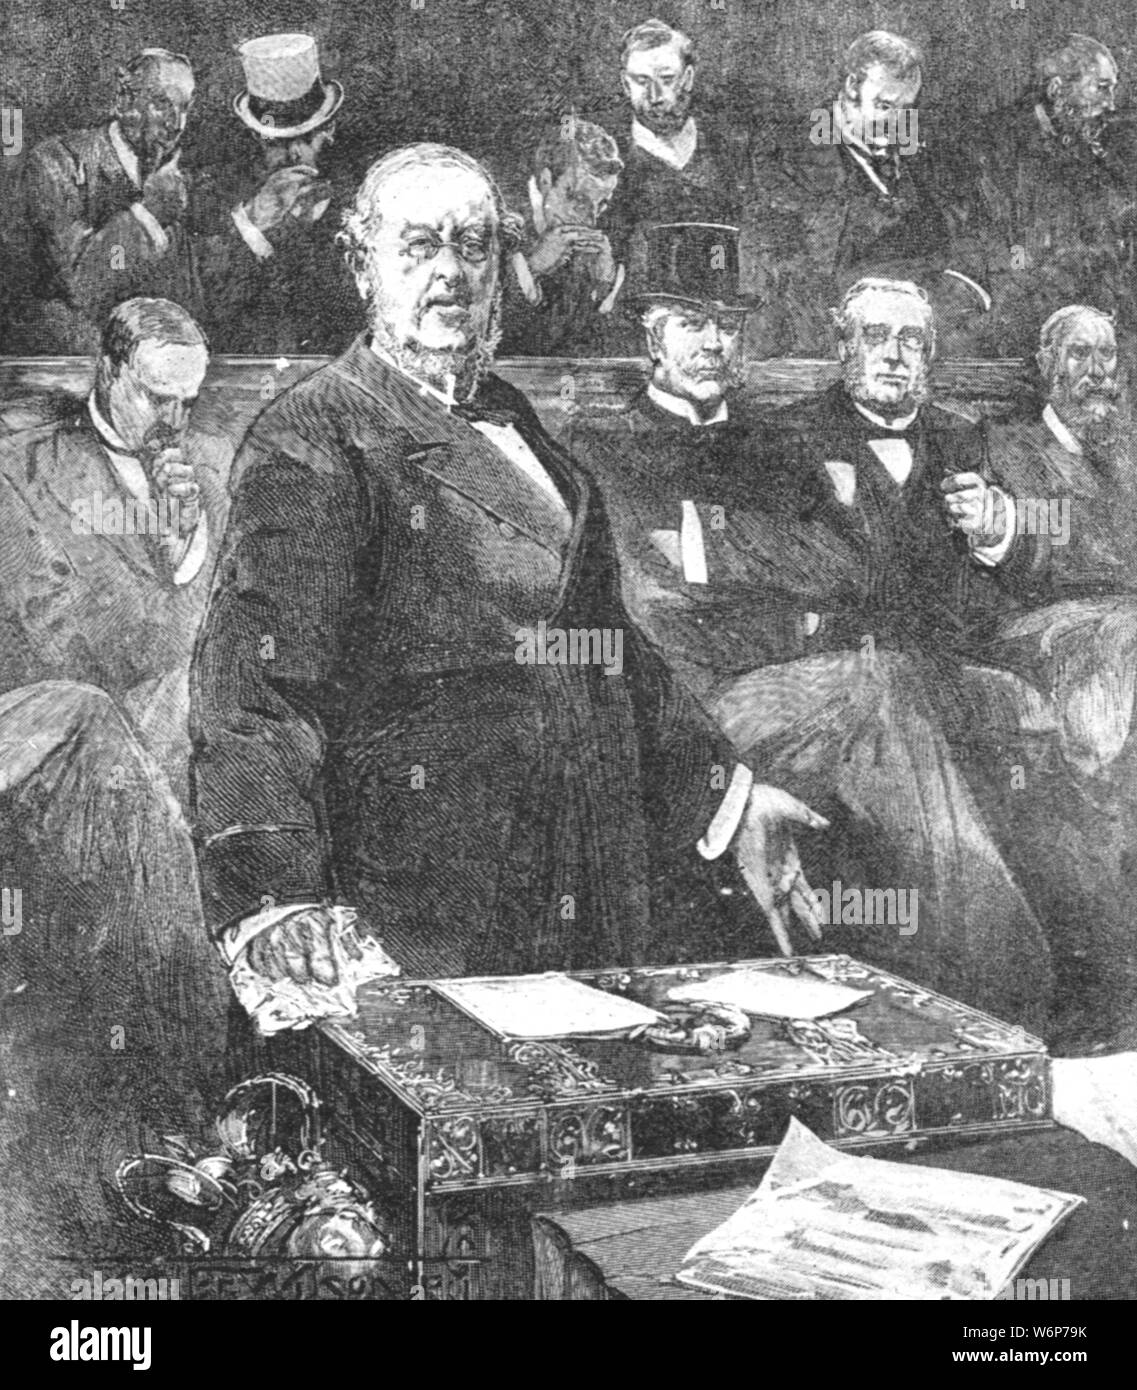 'Sir William Harcourt announcing the resignation of Lord Rosebery's government, June 24, 1895', (1901). British Liberal statesman William Vernon Harcourt (1827-1904) making an announcement in the House of Commons in London. The Liberal government of Archibald Primrose, 5th Earl of Rosebery, was succeeded by that of Conservative Robert Gascoyne-Cecil, 3rd Marquess of Salisbury. Harcourt first entered Parliament as a Liberal Member for Oxford in 1868. He served in Gladstone's governments as Home Secretary (1880-1885) and as Chancellor of the Exchequer (1886, 1892-1895). He was Leader of the Libe Stock Photo